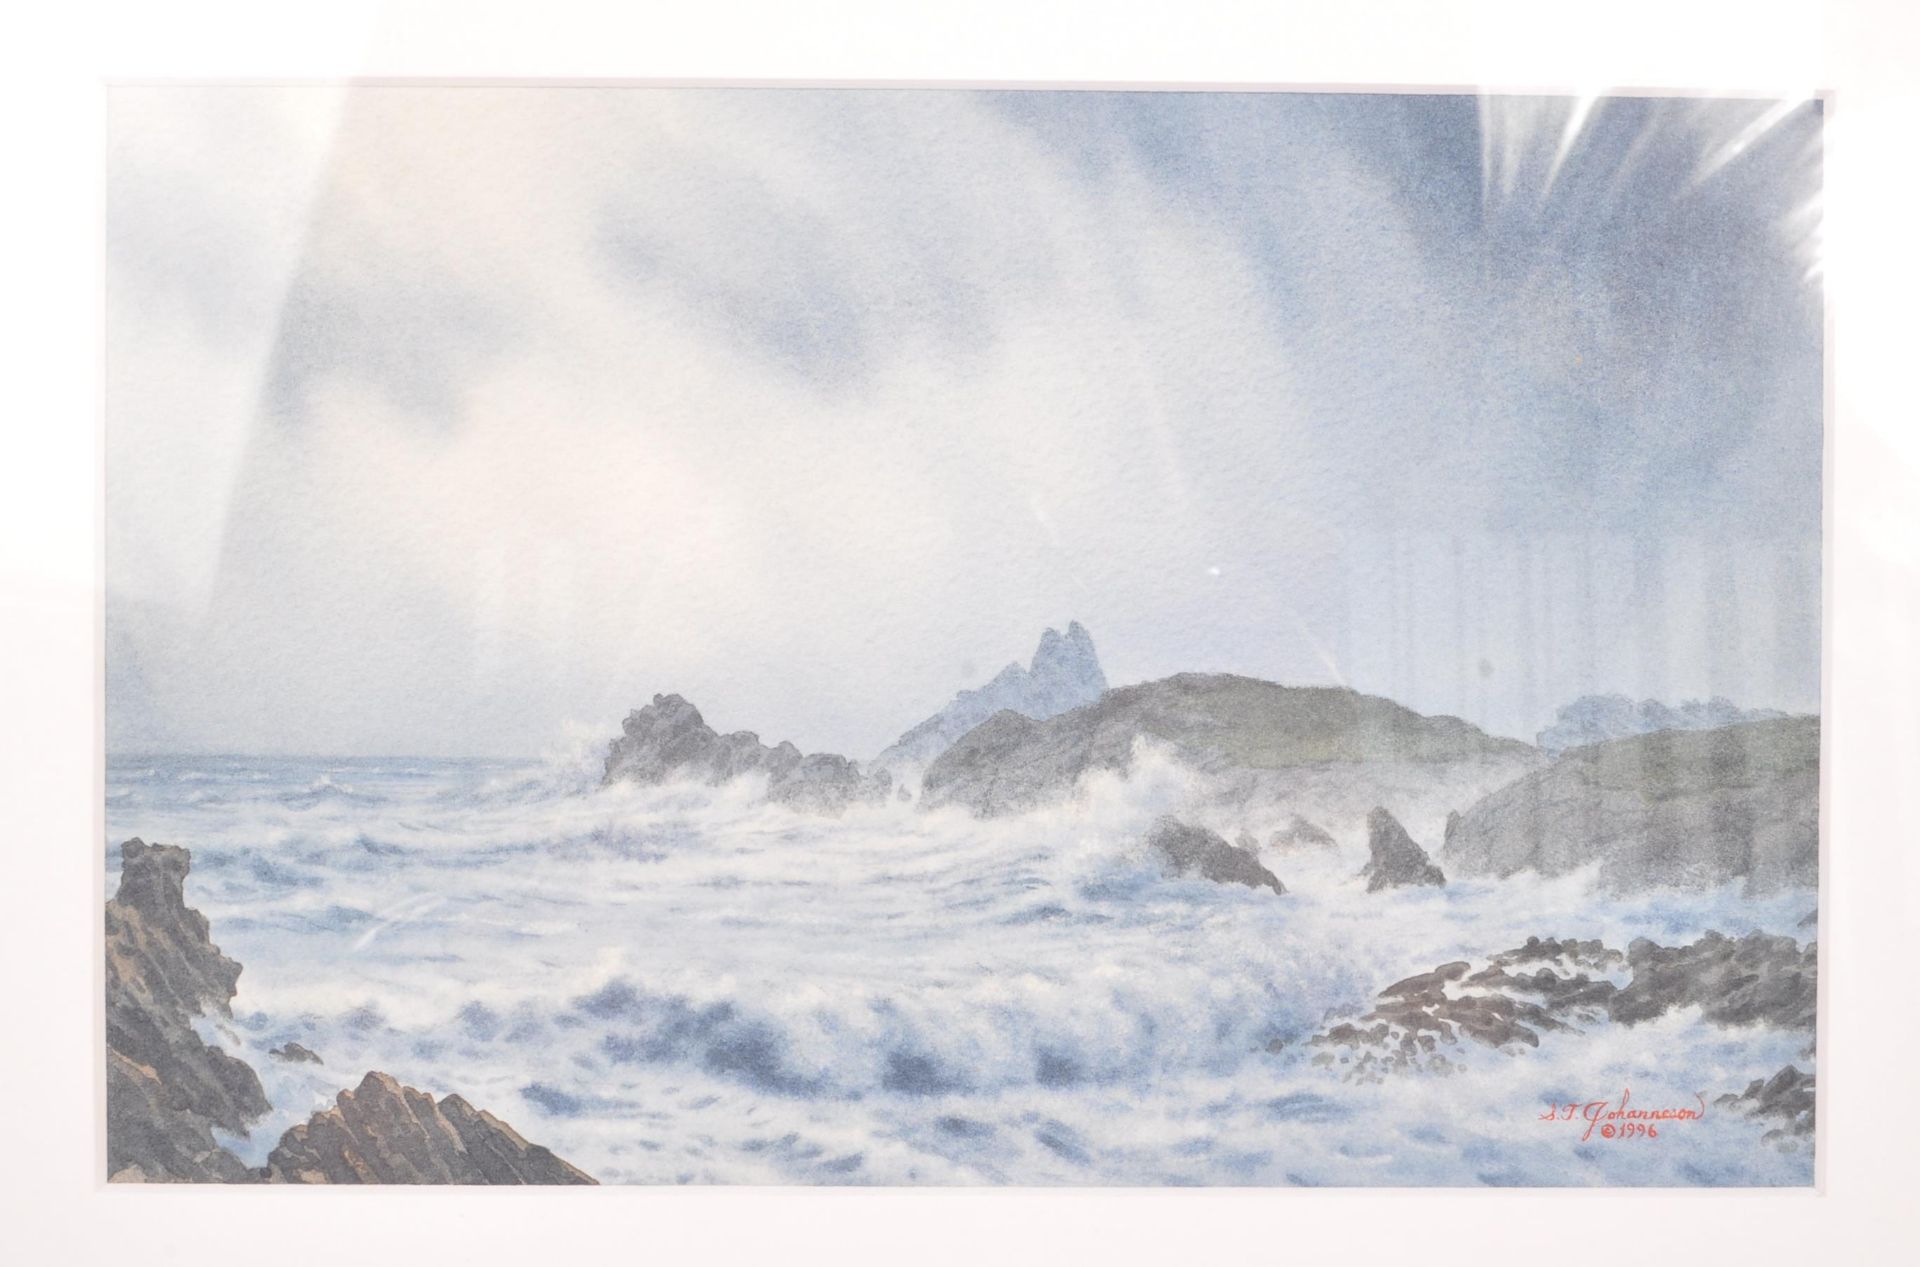 STEVEN THOR JOHANNESON - WATERCOLOUR PAINTING CORNWALL - Image 2 of 5